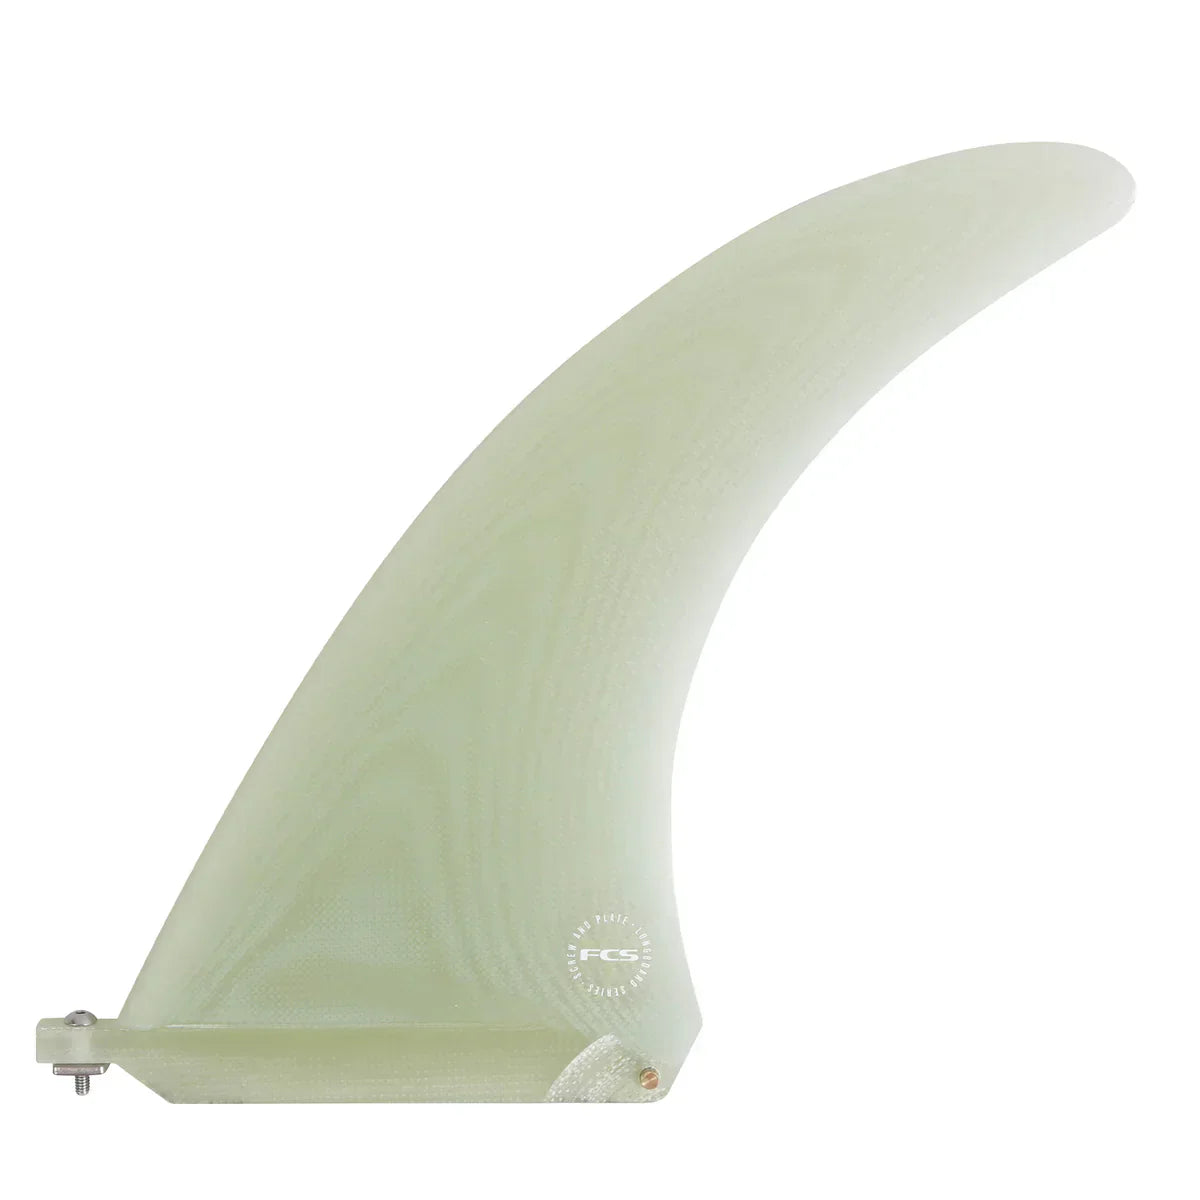 fcs-i-screw-and-plate-clique-surfboard-fin-PG-performance-glass-galway-ireland-blacksheepsurfco-9-inch